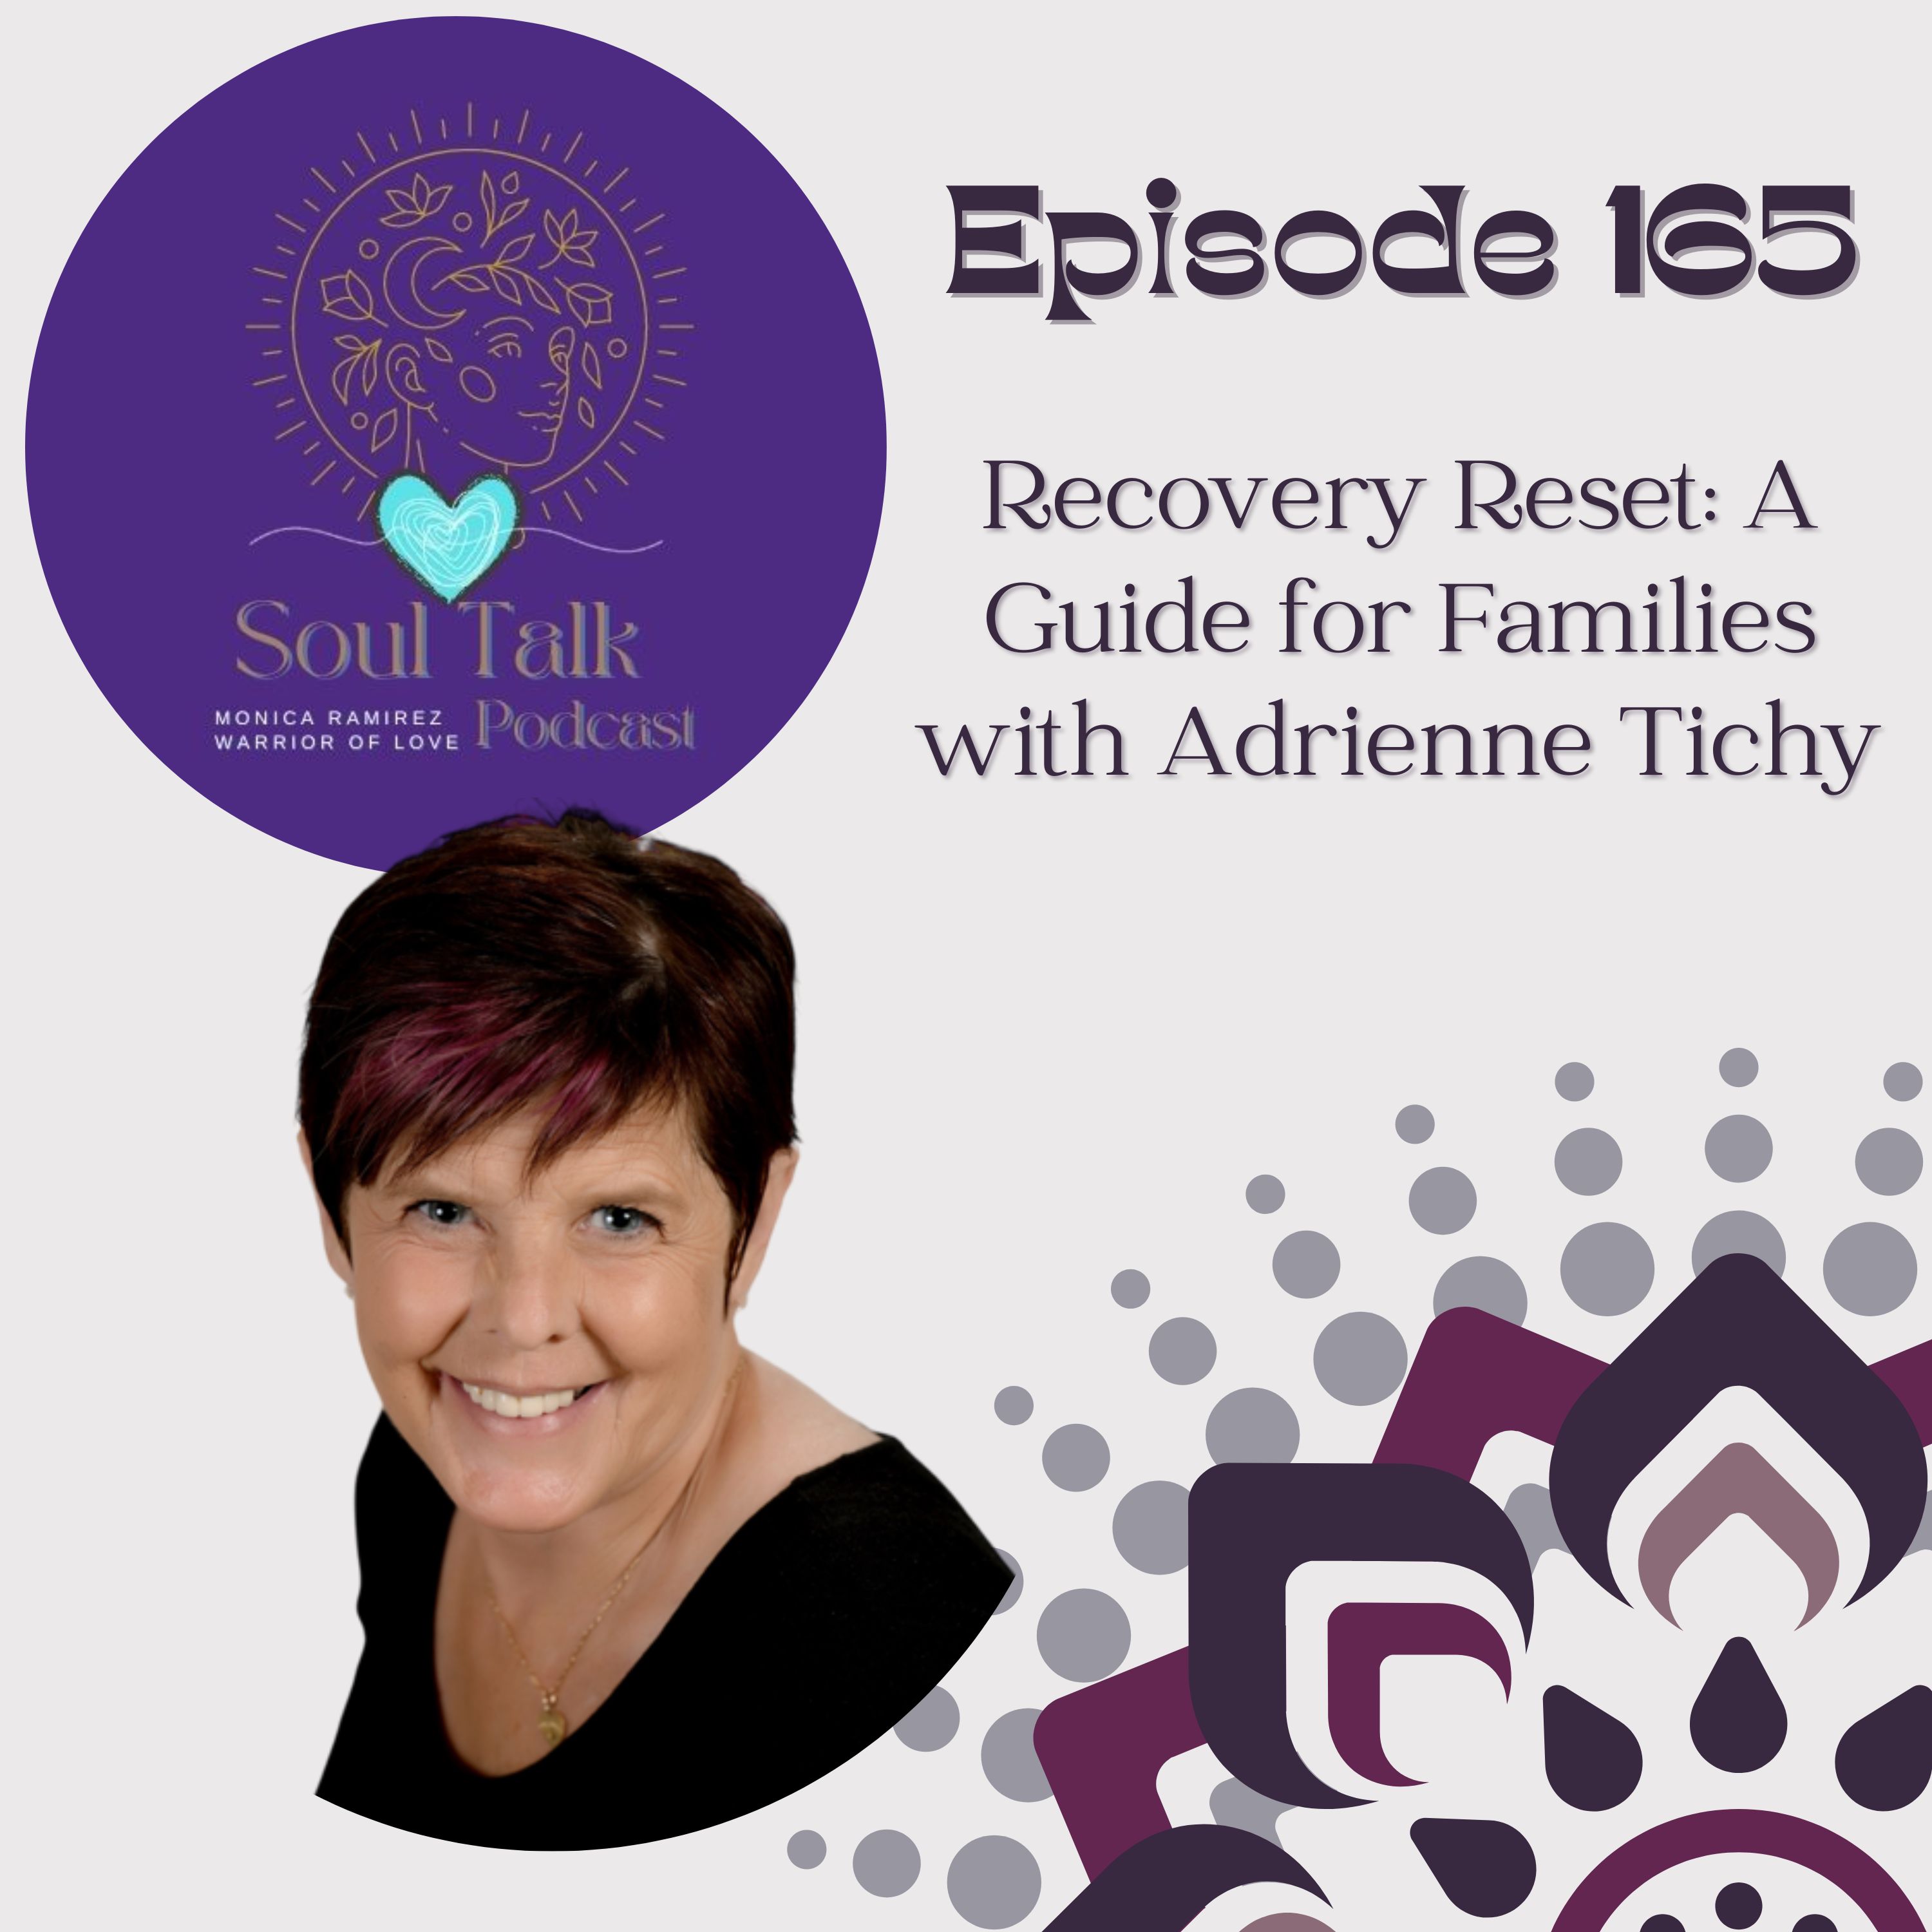 The Soul Talk Episode 165: Recovery Reset - A Guide for Families